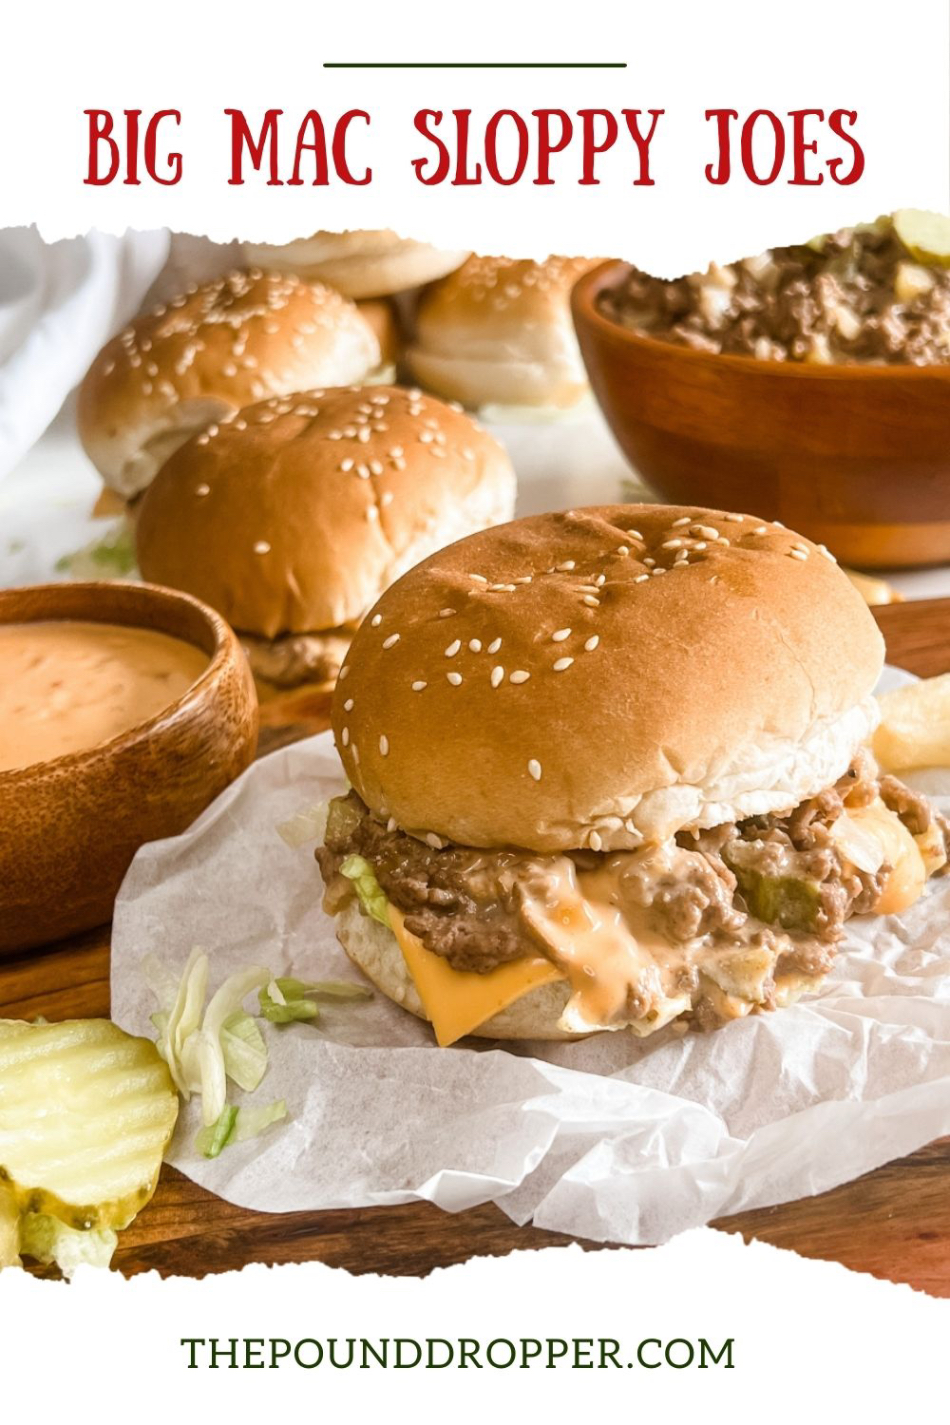 Big Mac Sloppy Joes combine an American staple to one of the most popular fast food hamburgers-the Big Mac!! These Big Mac Sloppy Joe's are loaded lean ground beef, onions, pickles, and cheddar cheese and then tossed in a copycat Skinny Big Mac Sauce! via @pounddropper